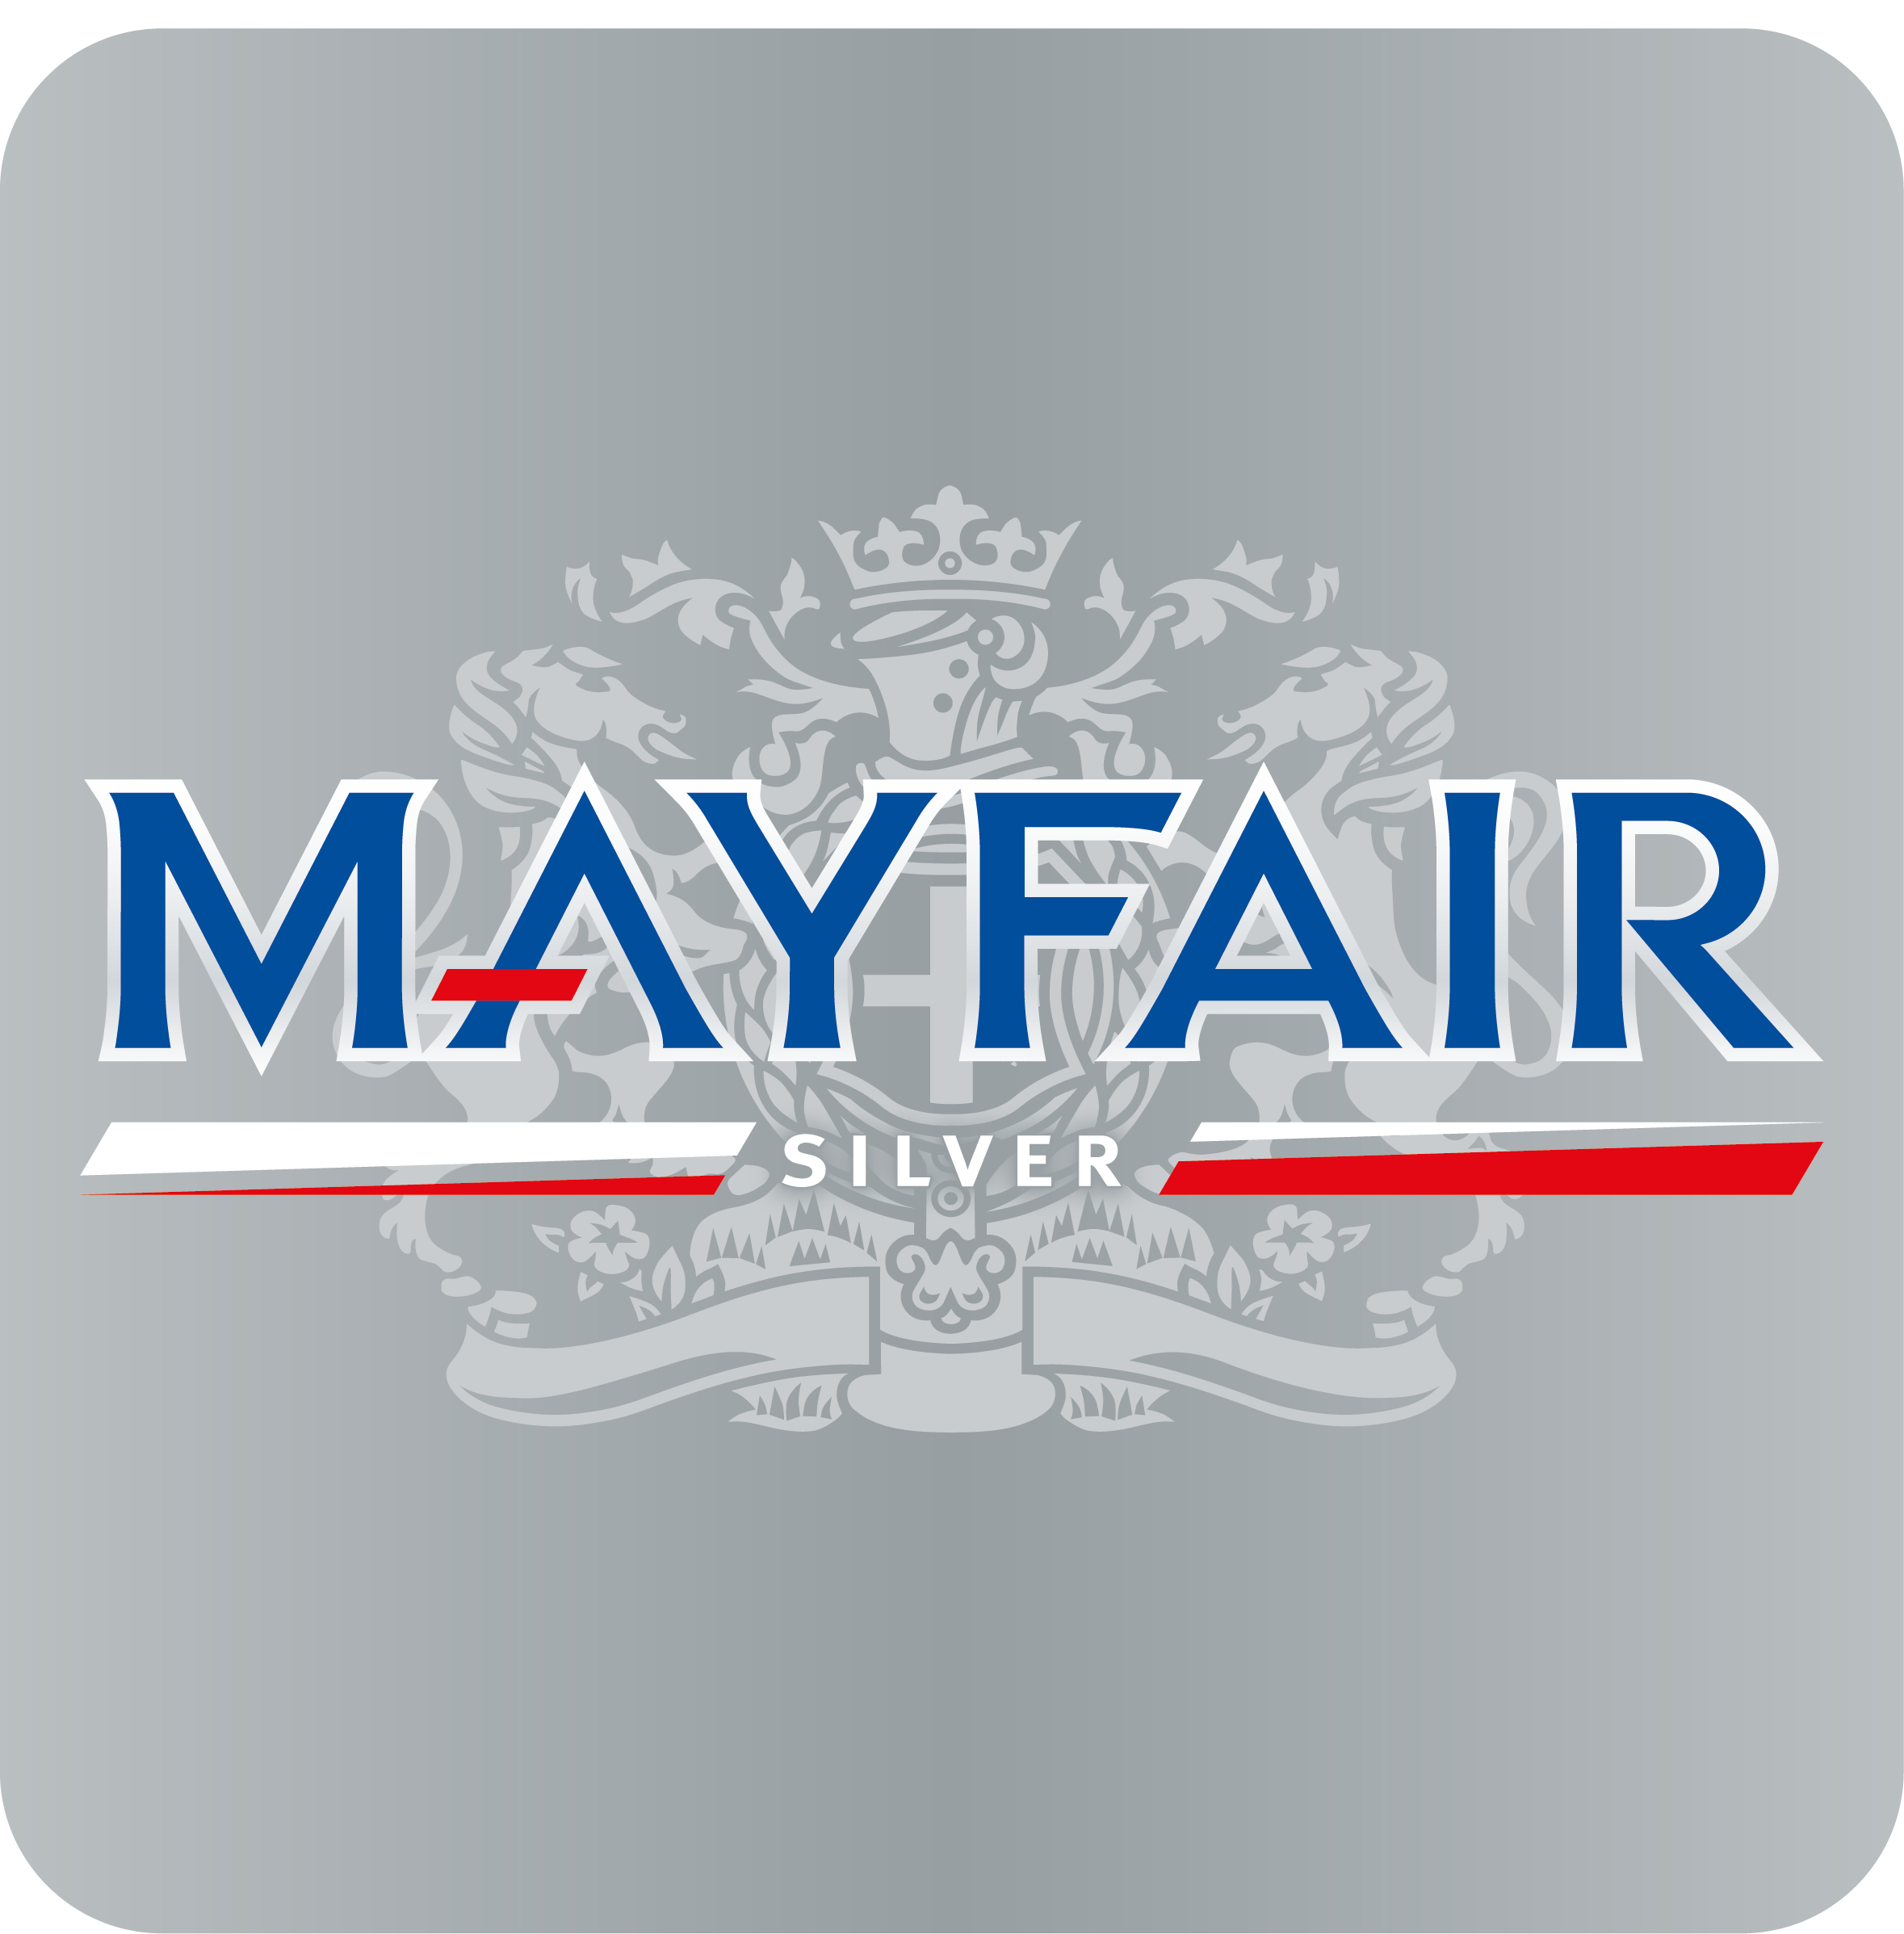 Mayfair turns 30!  JTI celebrates key milestone with giveaway competition